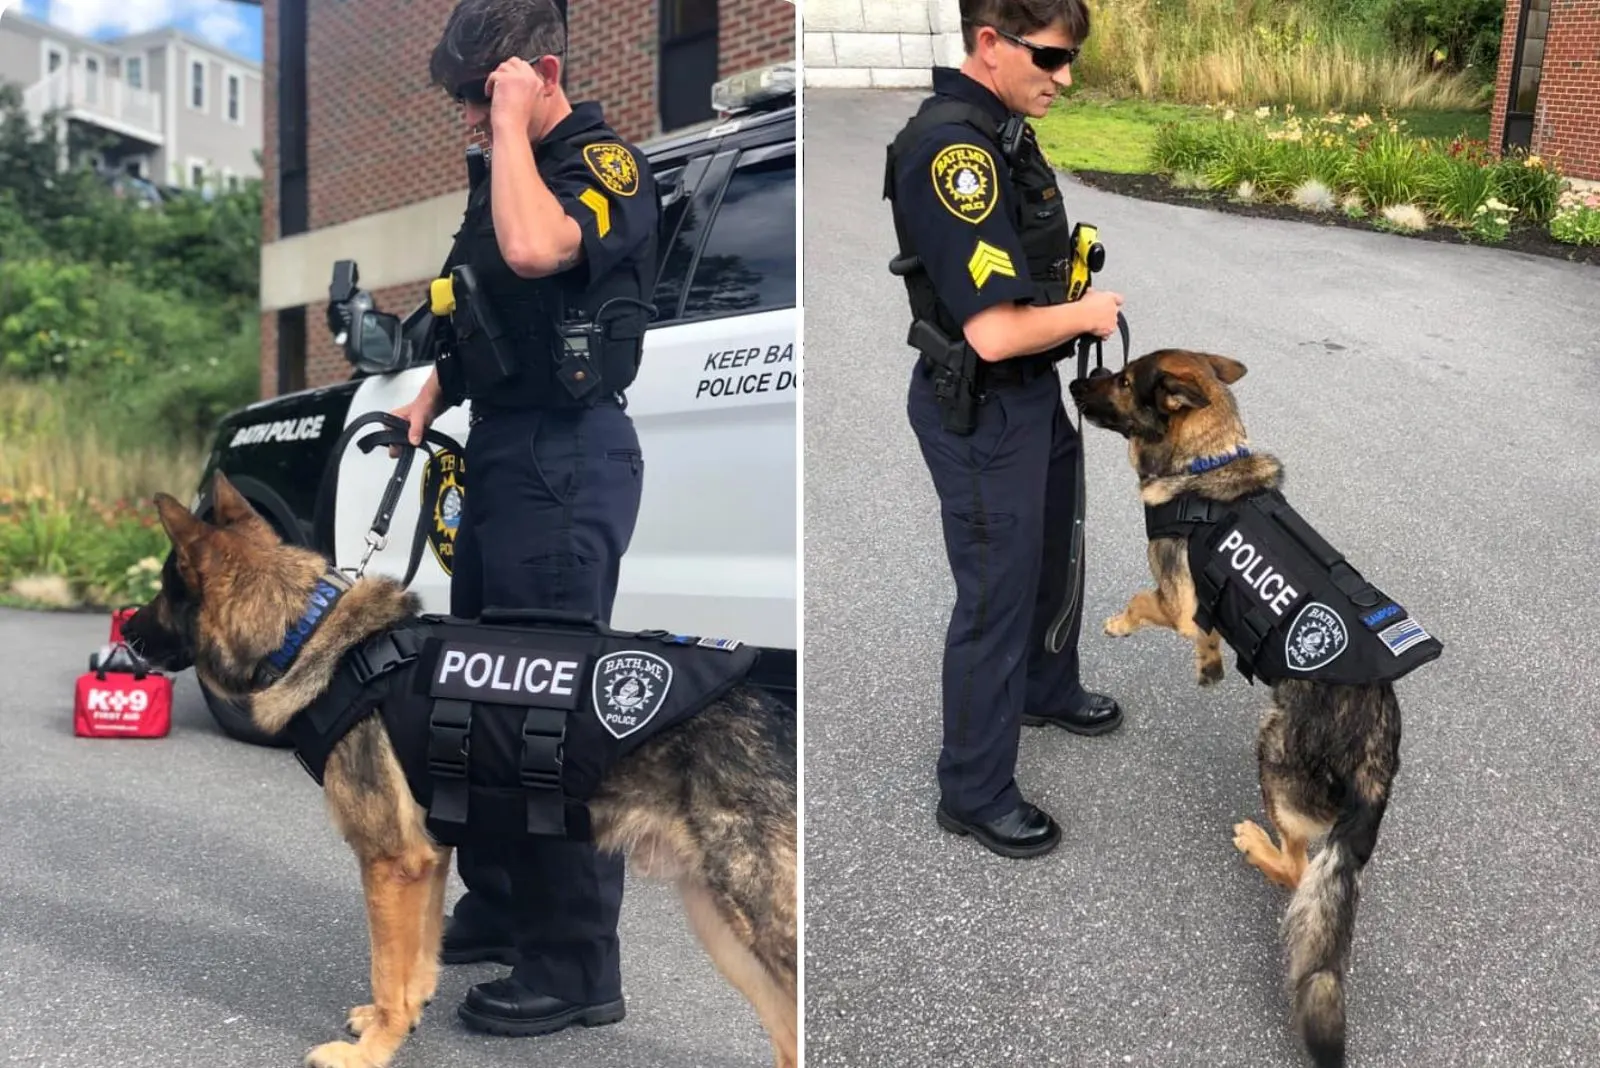 police officer and german shepherd dog on a leash on a duty